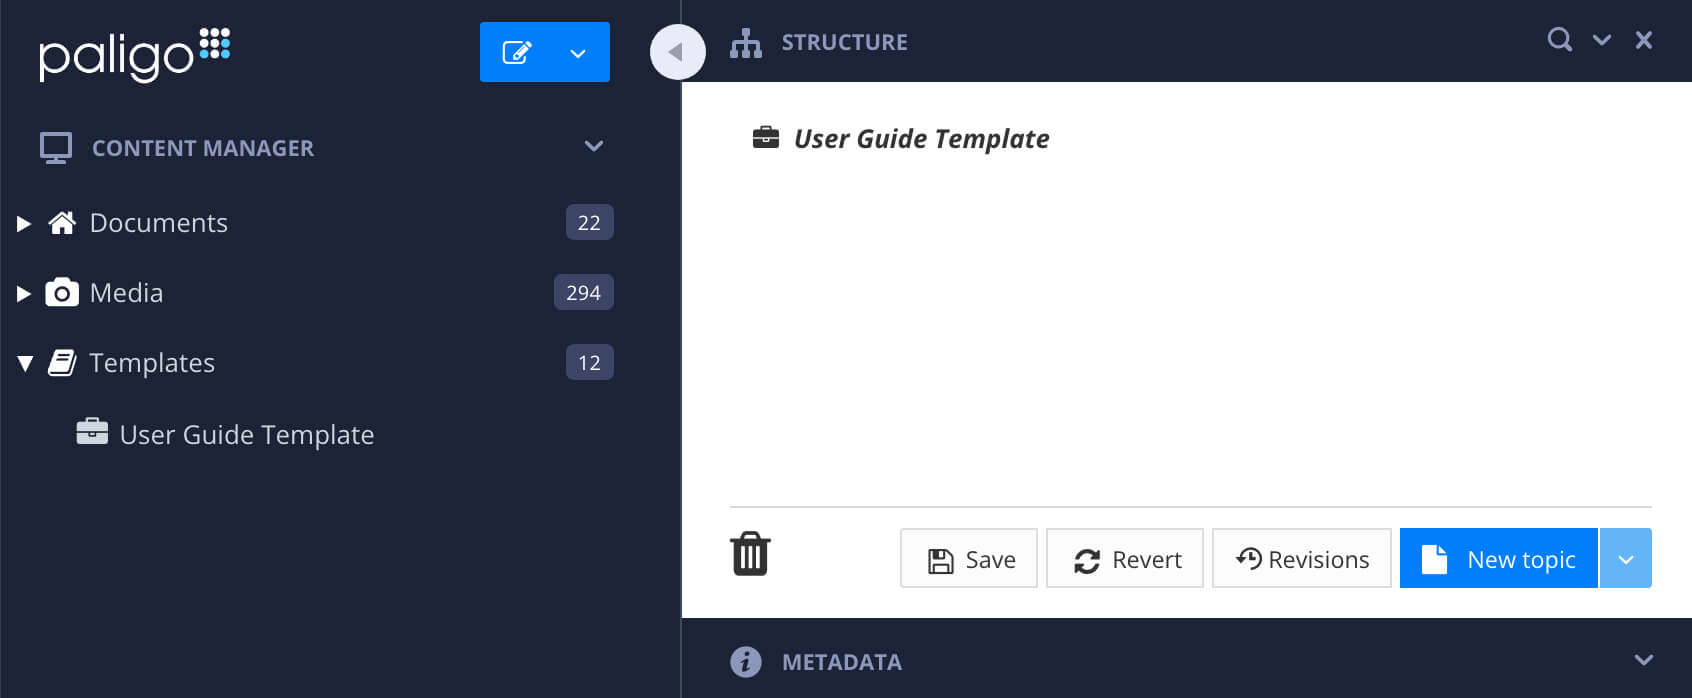 Content Manager sidebar showing the template is selected. The structure dialog is shown next to it, and is empty.